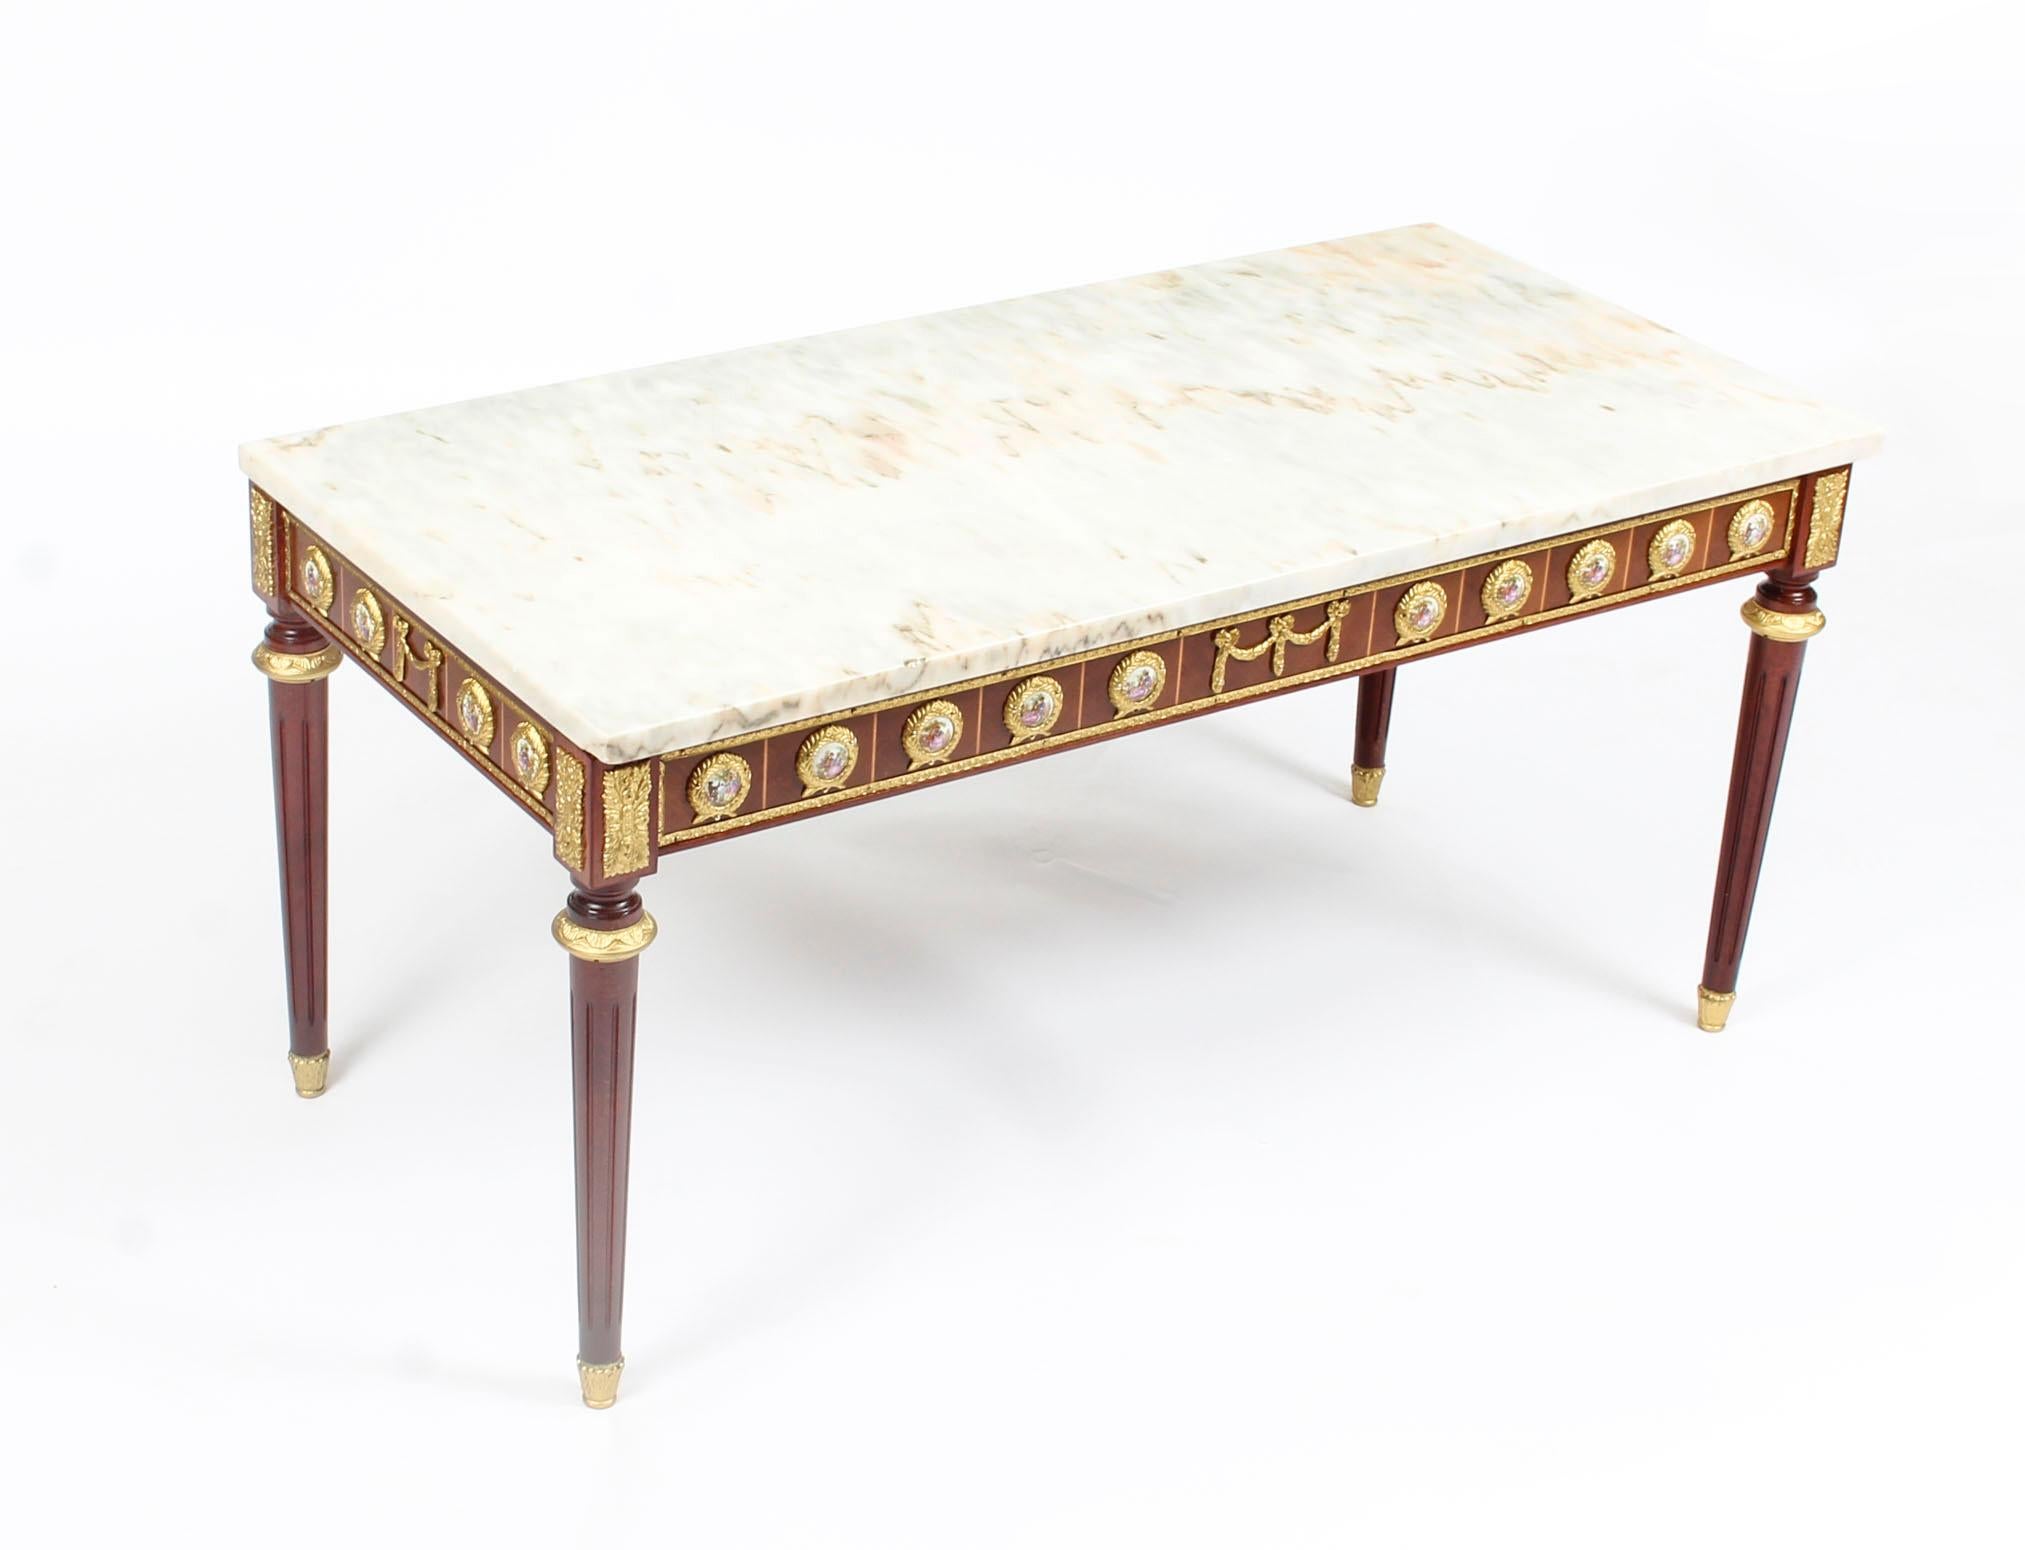 This is an exquisite pair of ormolu-mounted walnut and kingwood marble top coffee tables, mid-century and circa 1950 in date, by the renowned makers H&L Epstein.
  
This wonderful pair of coffee tables are rectangular in shape with elegant and